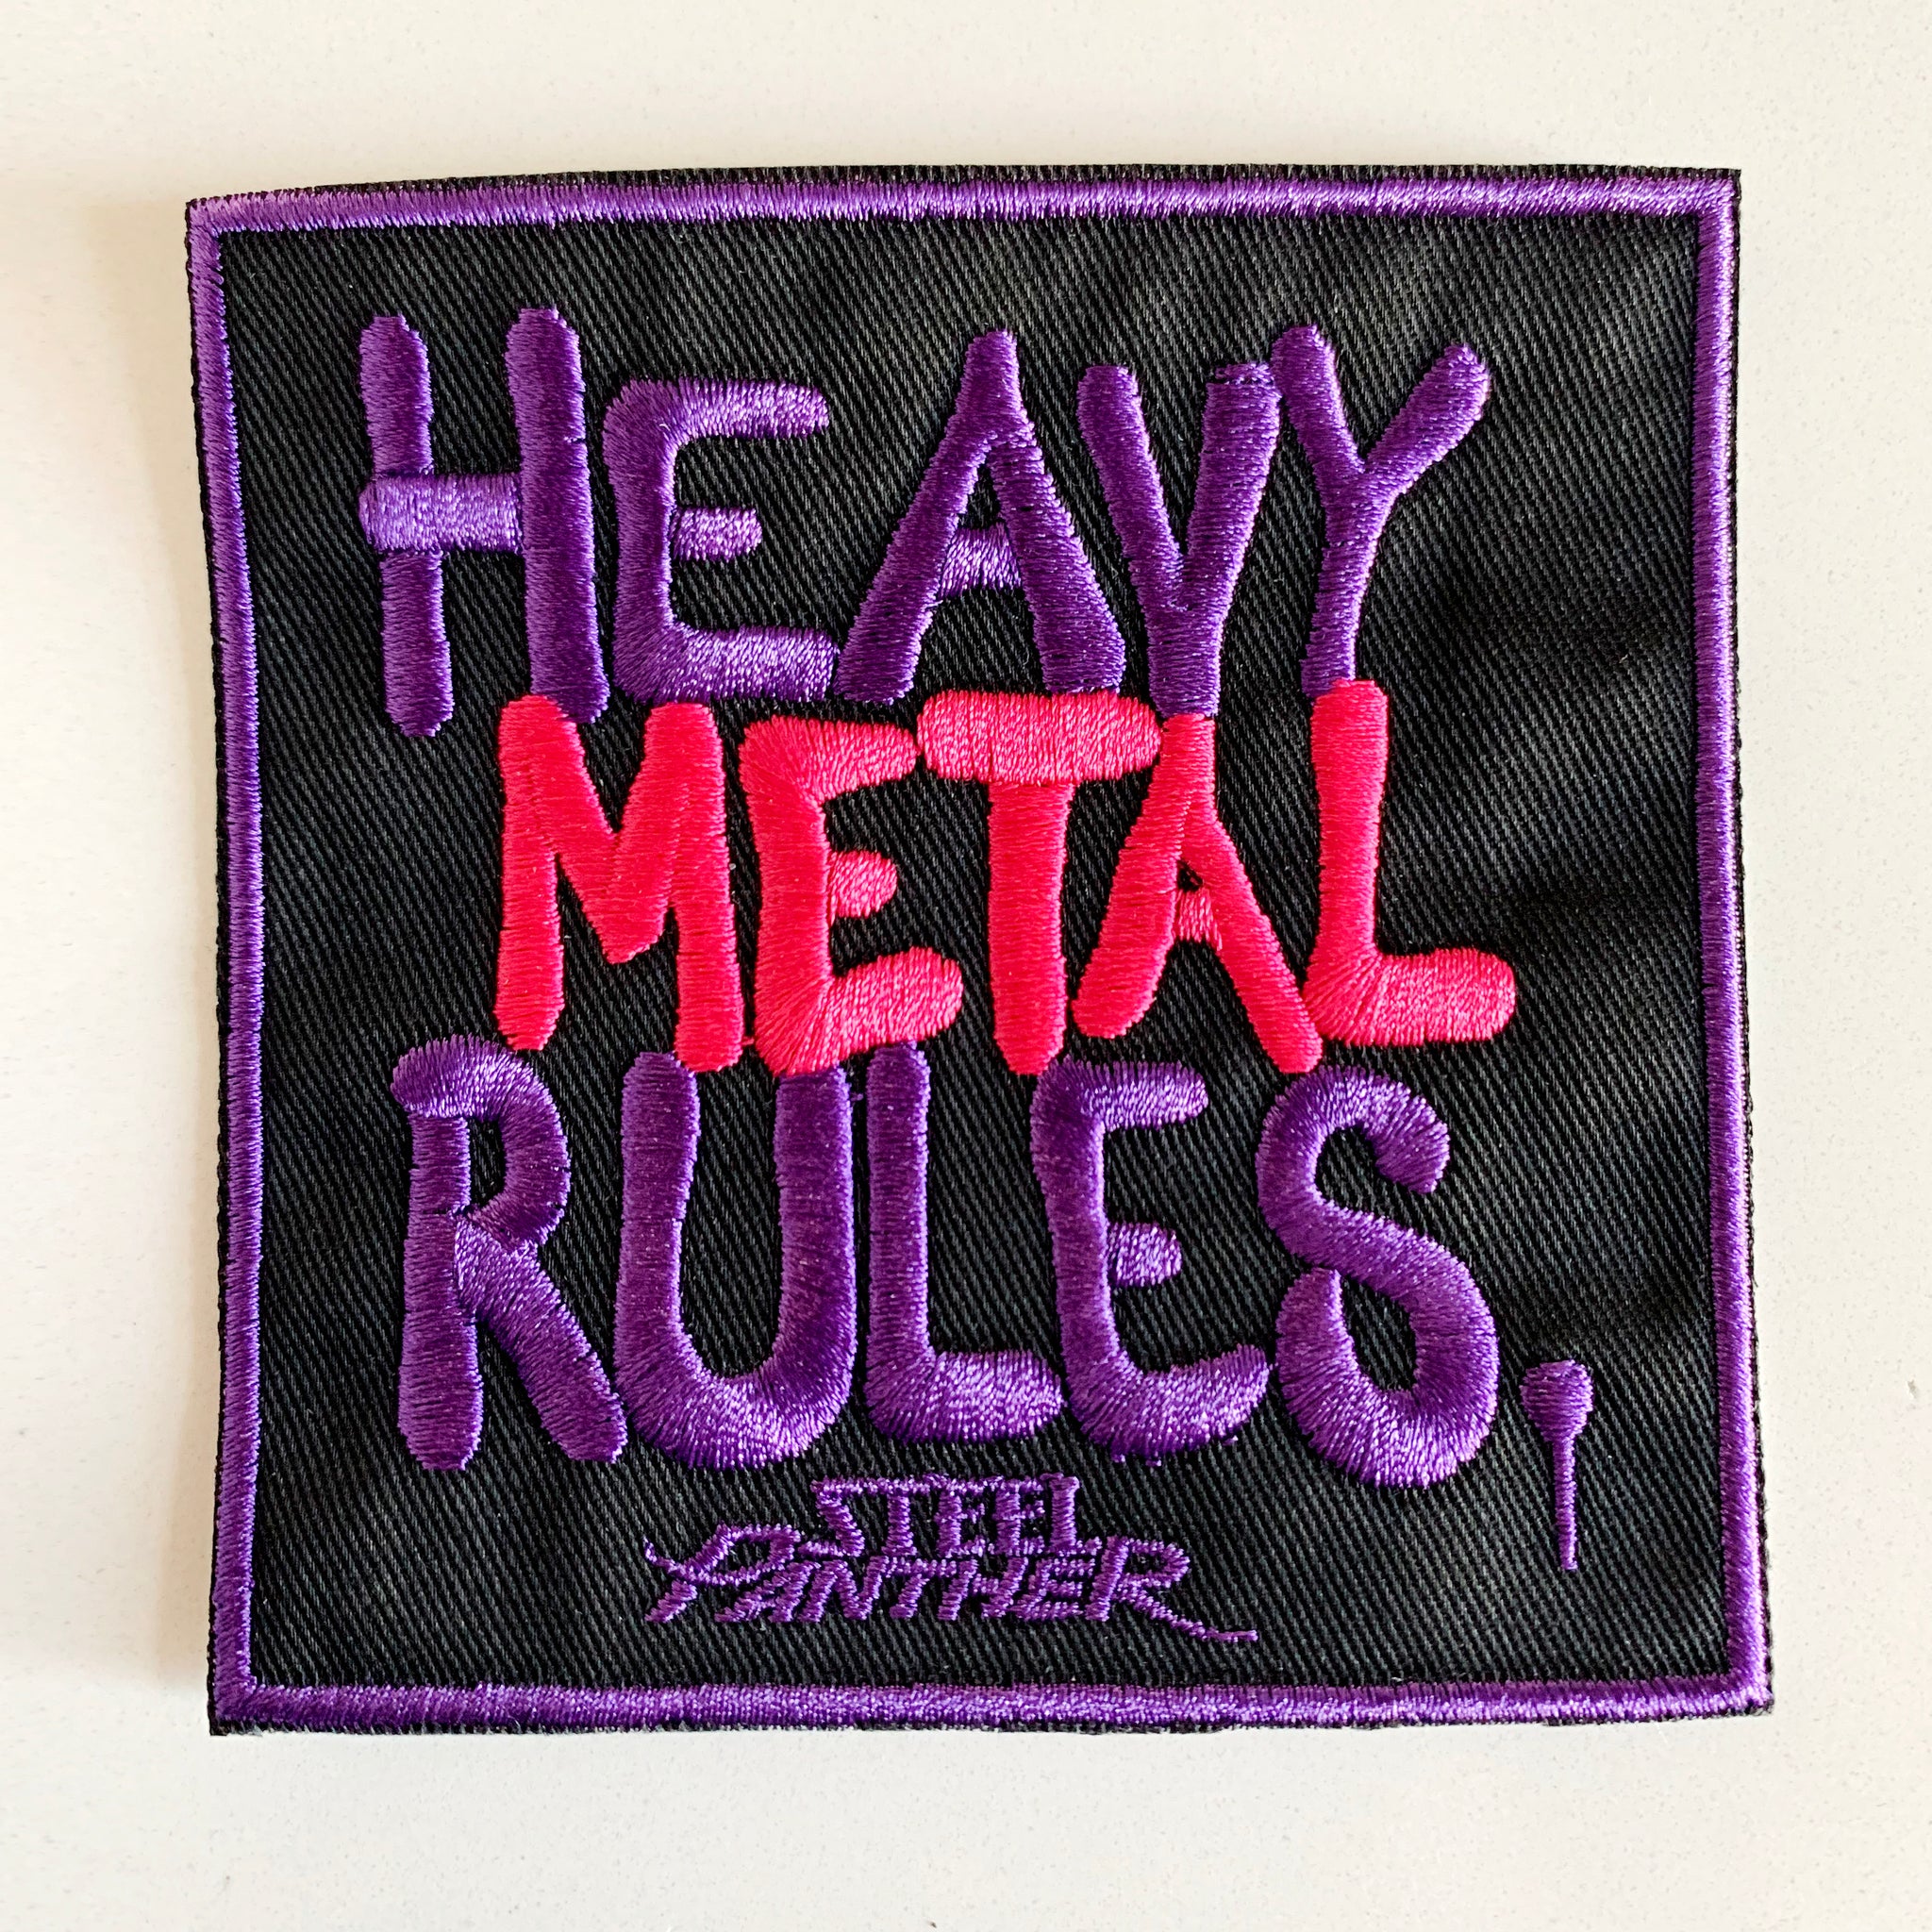 Heavy Metal Rules Patch